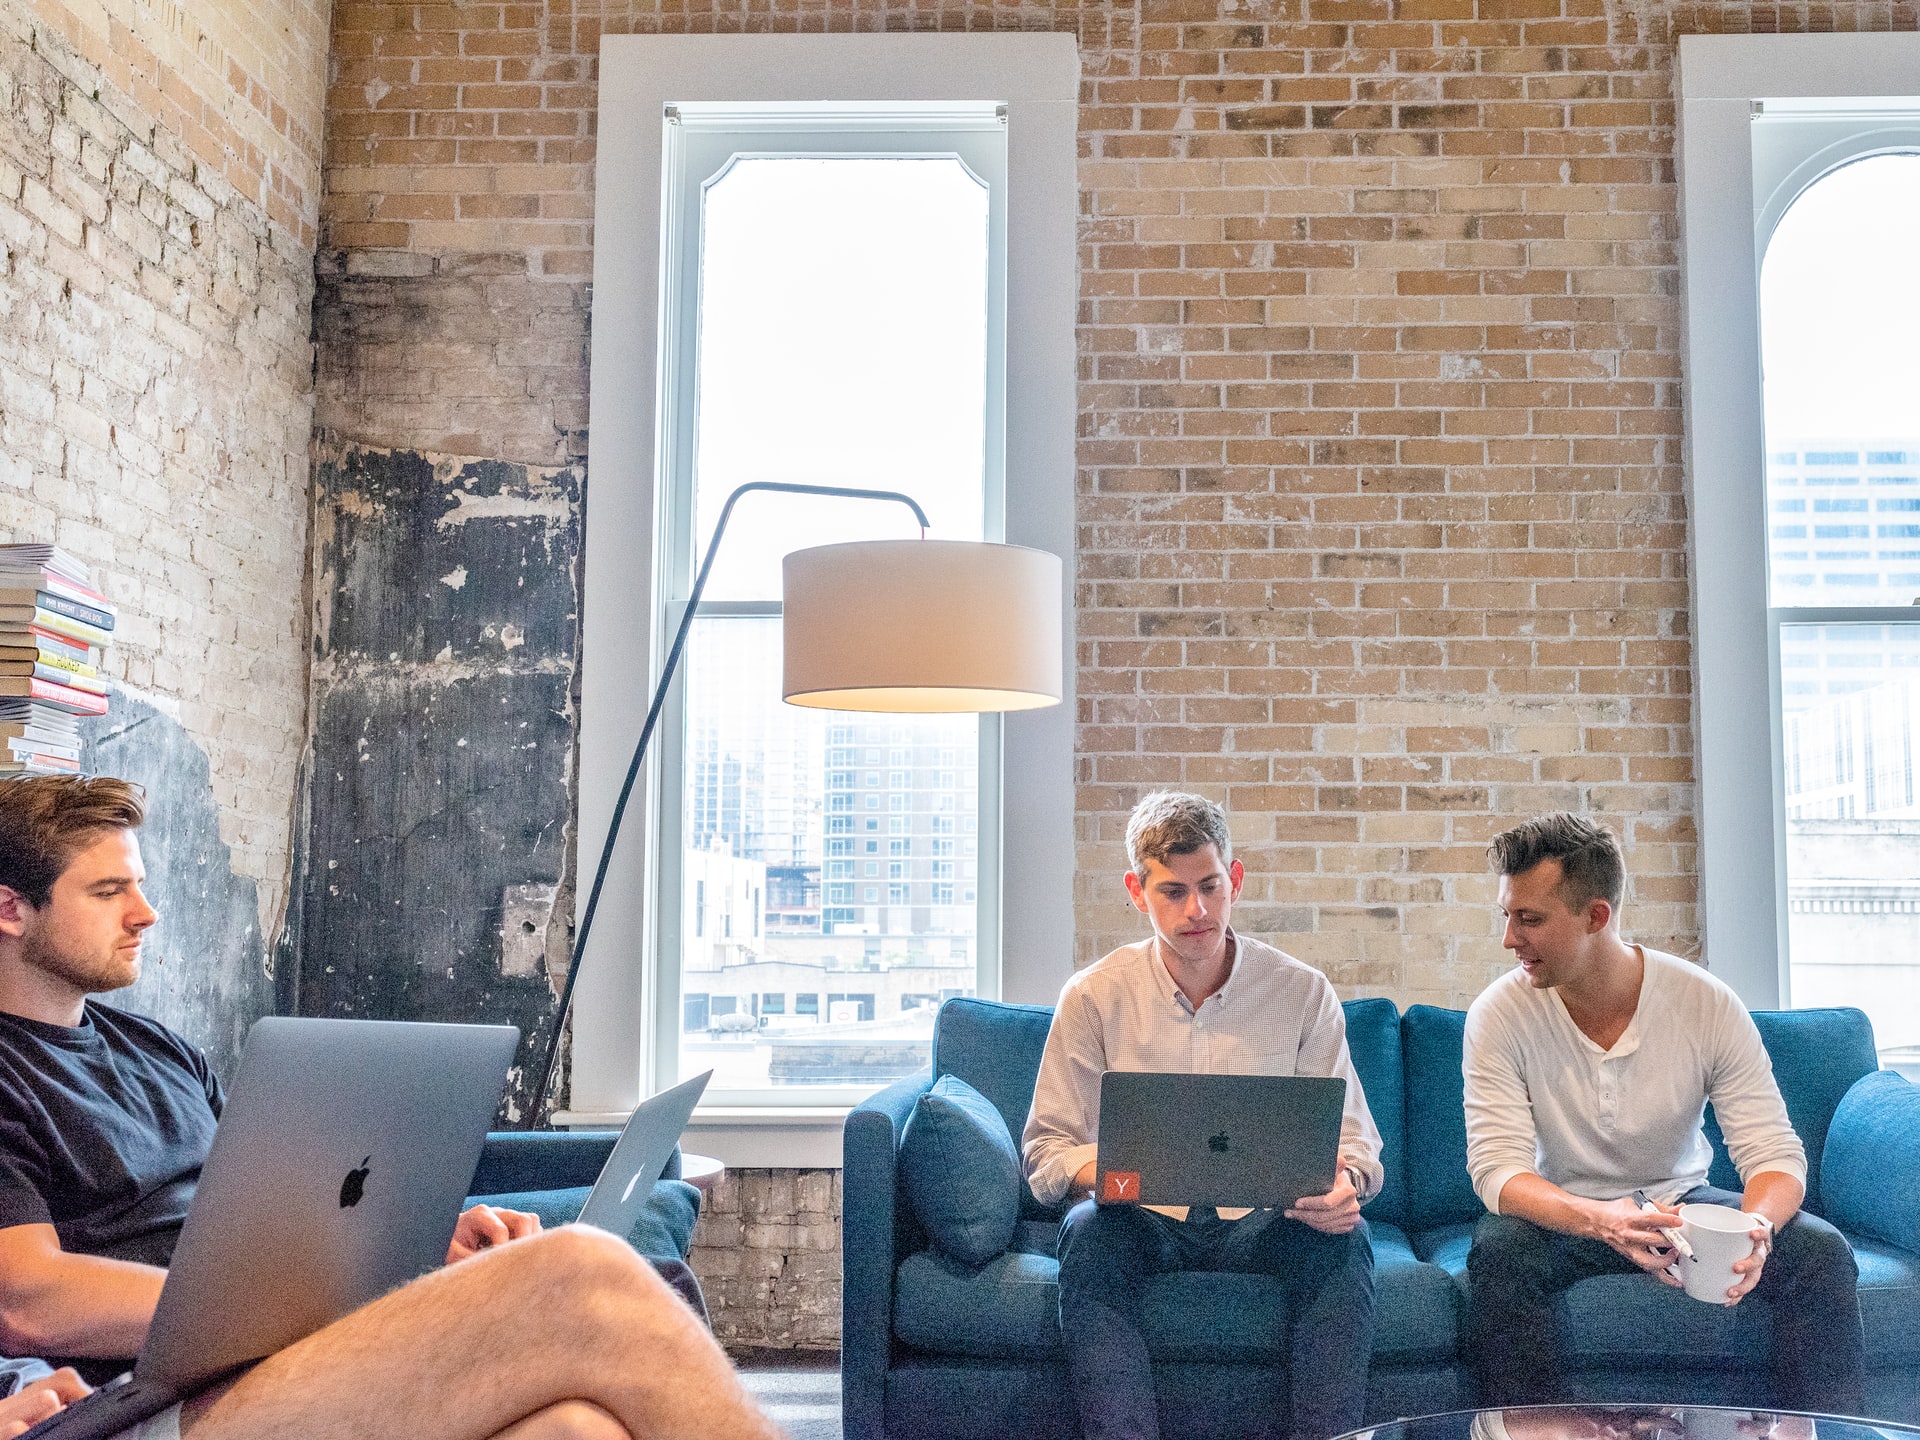 Remote workers collaborating in a coworking space